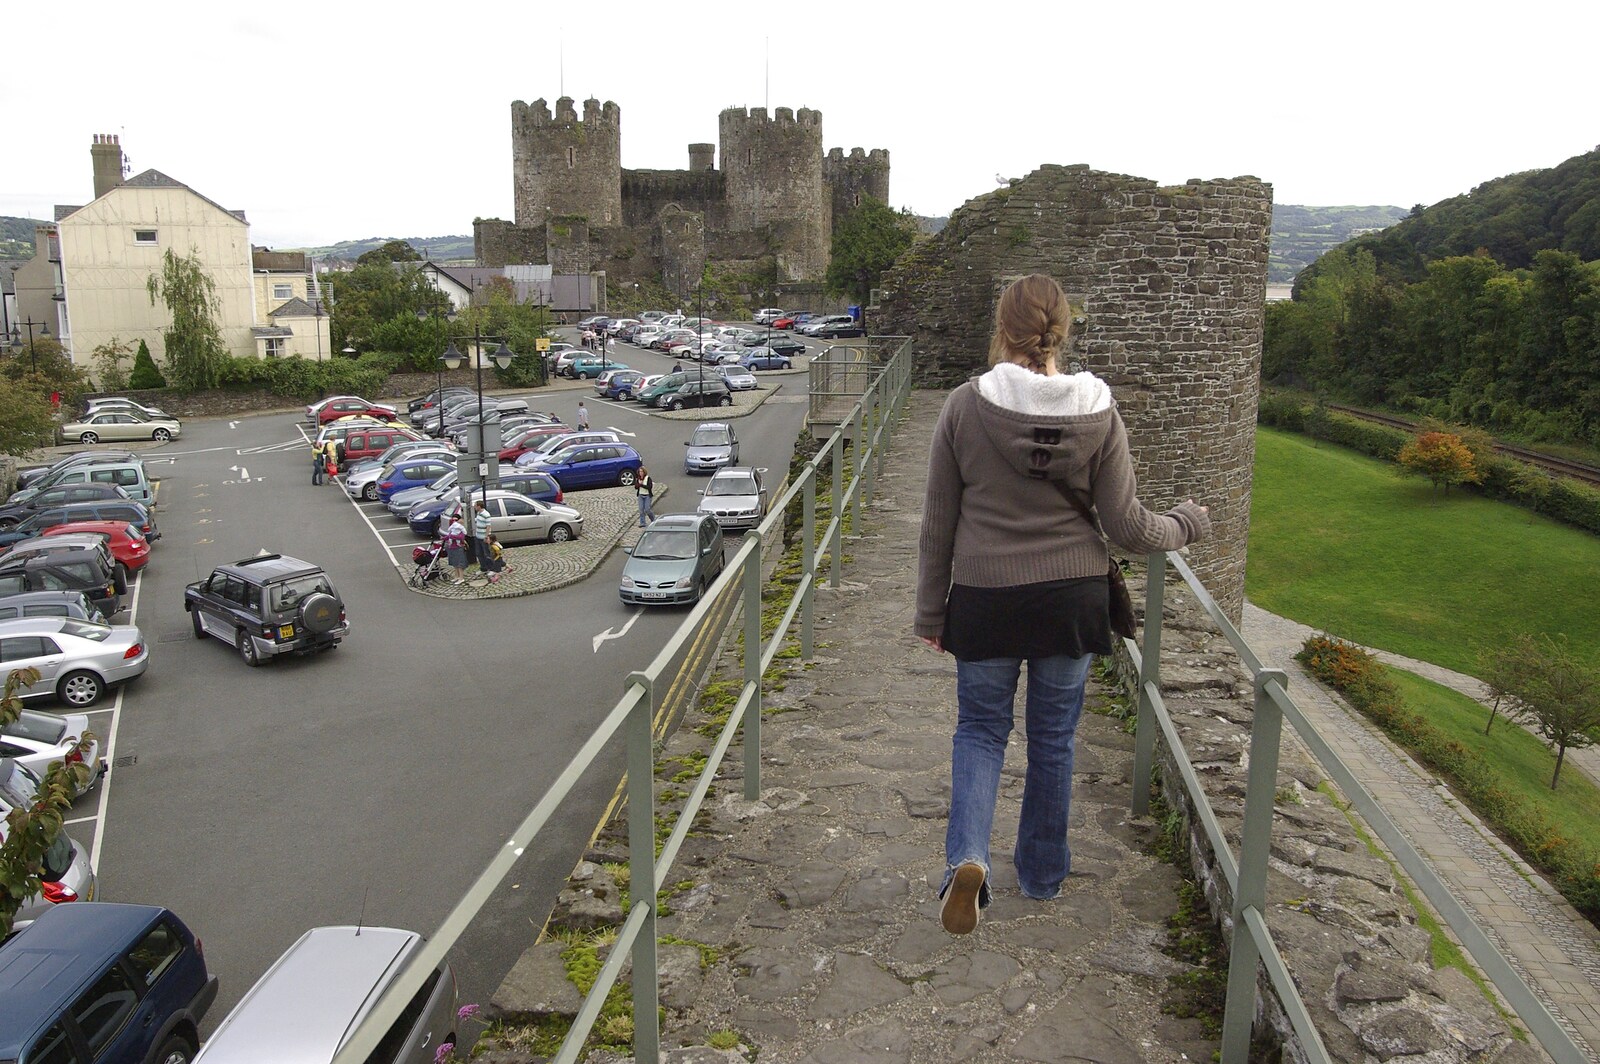 A Road Trip to Ireland Via Sandbach and Conwy, Cheshire and Wales - 21st September 2007: Isobel wanders the castle walls